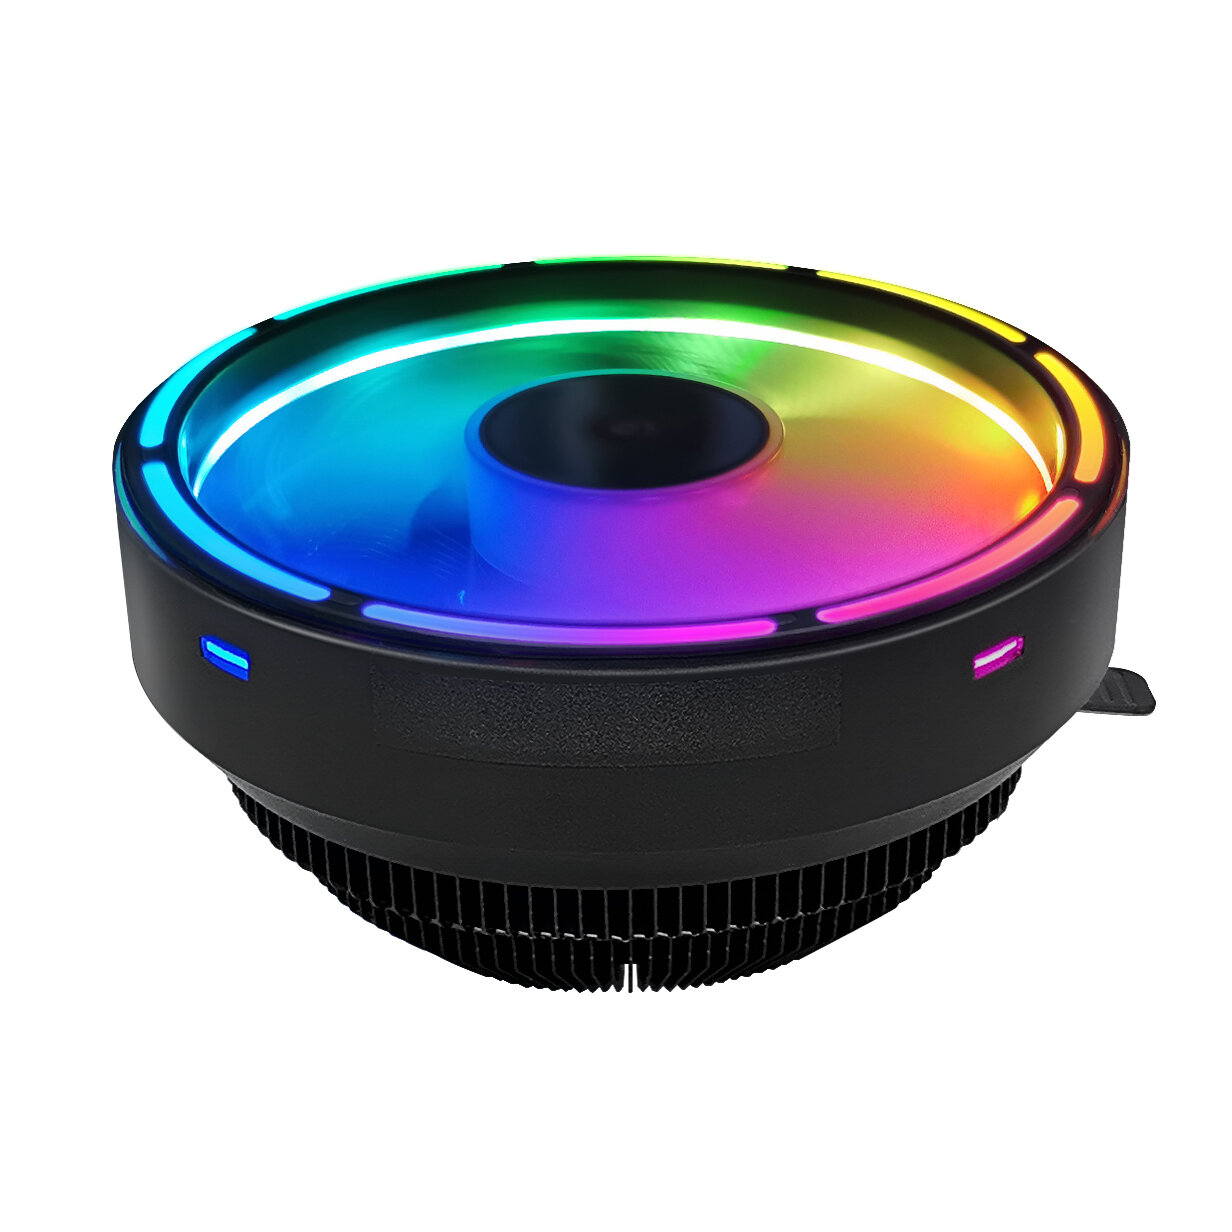 Coolmoon Glory colorful RGB CPU cooler 3Pin 12V 120MM fan Support to AMD FM2/FM1/AM3+/AM4/AM2/940/93